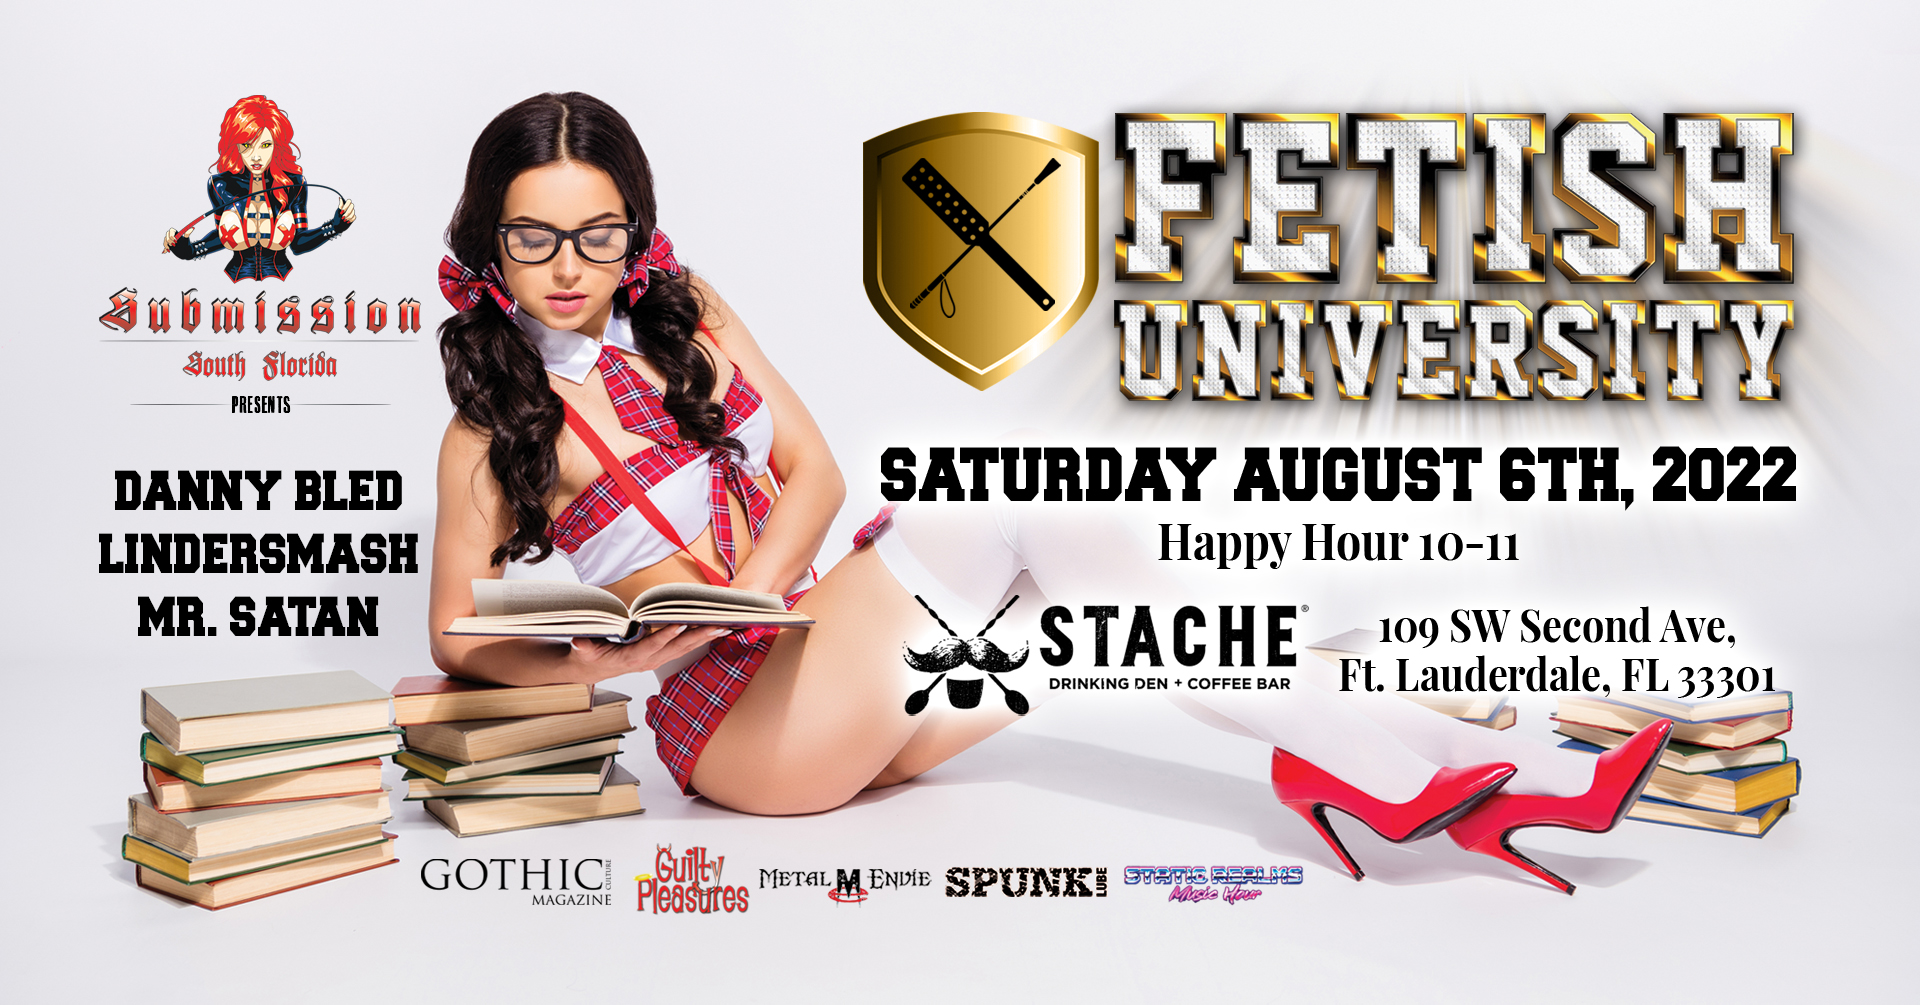 SUBMISSION EVENTS PRESENTS "FETISH UNIVERSITY"